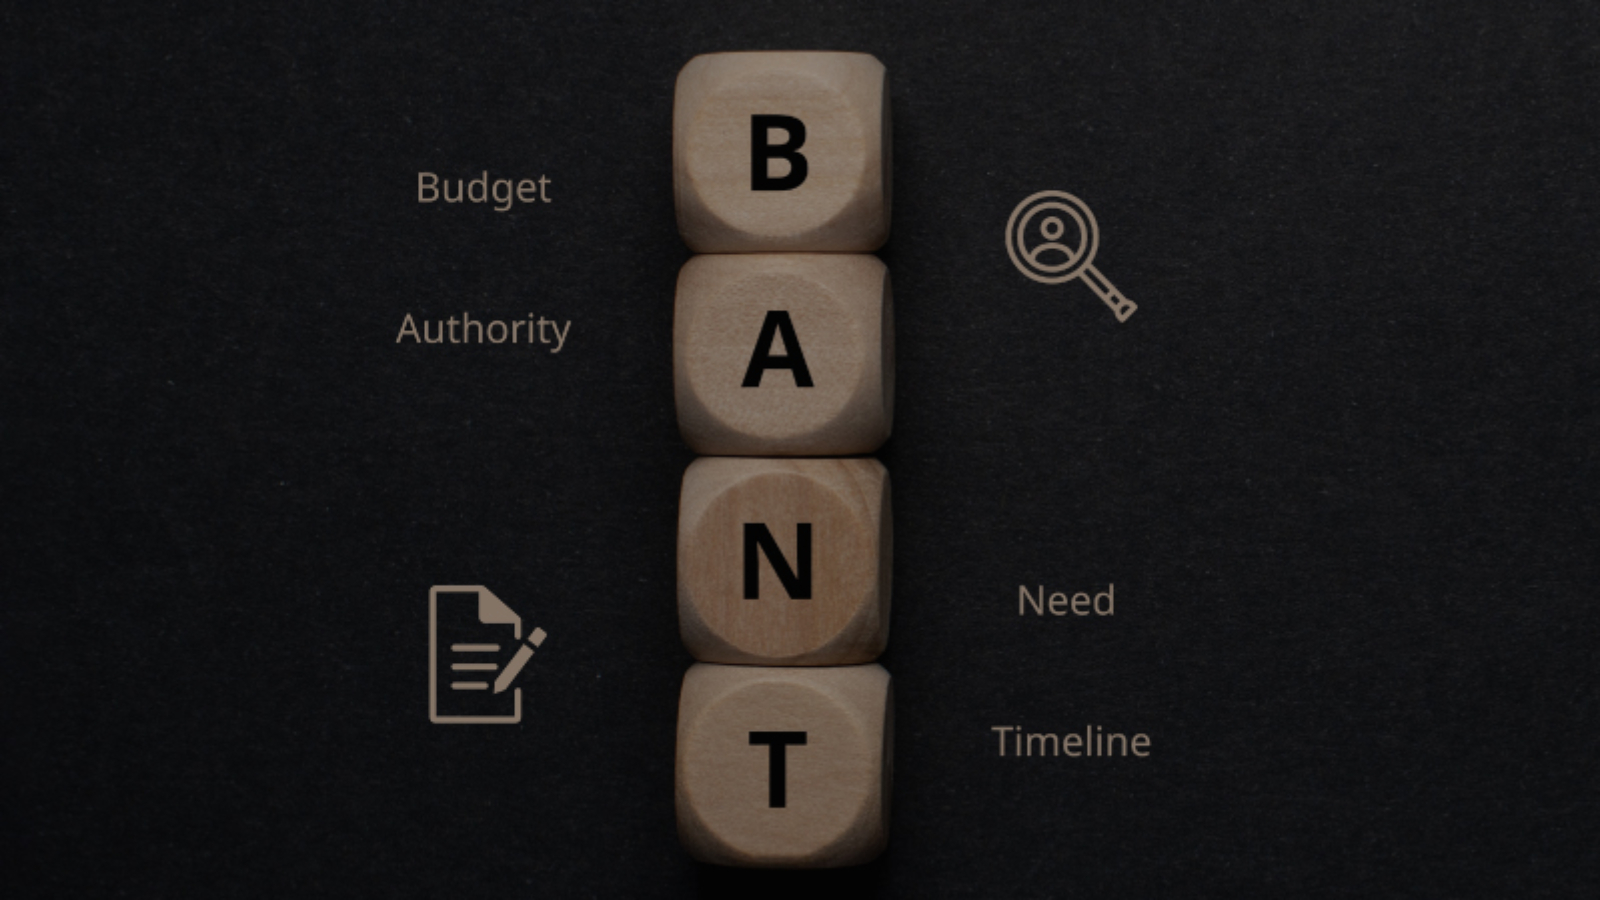 Everything About the BANT Framework